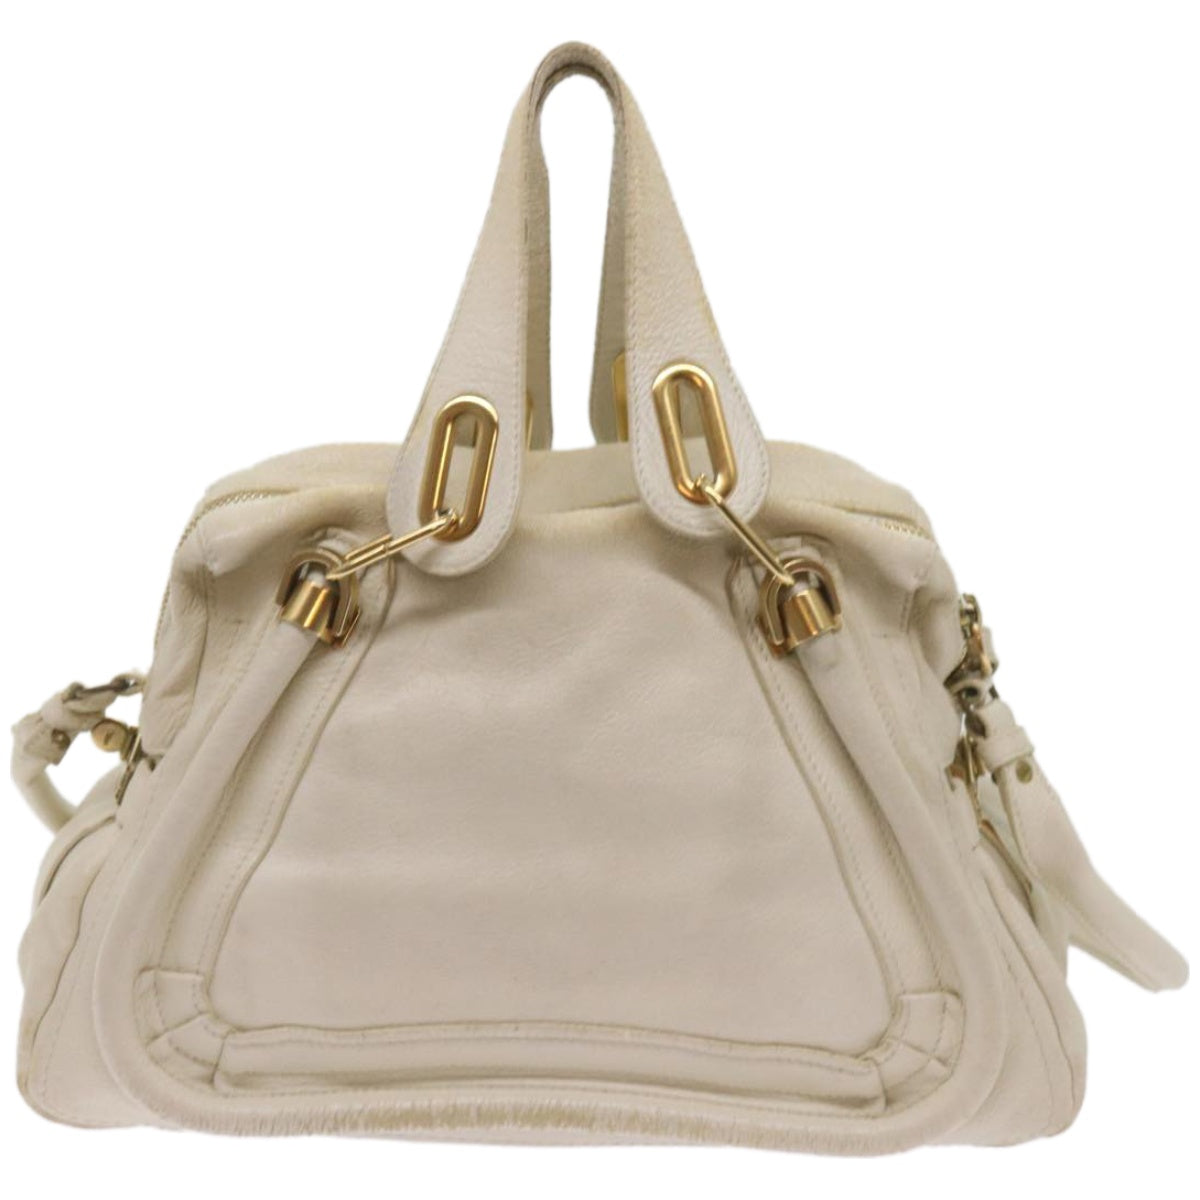 Chloe Mercy Shoulder Bag Leather White Auth 68076 - 0